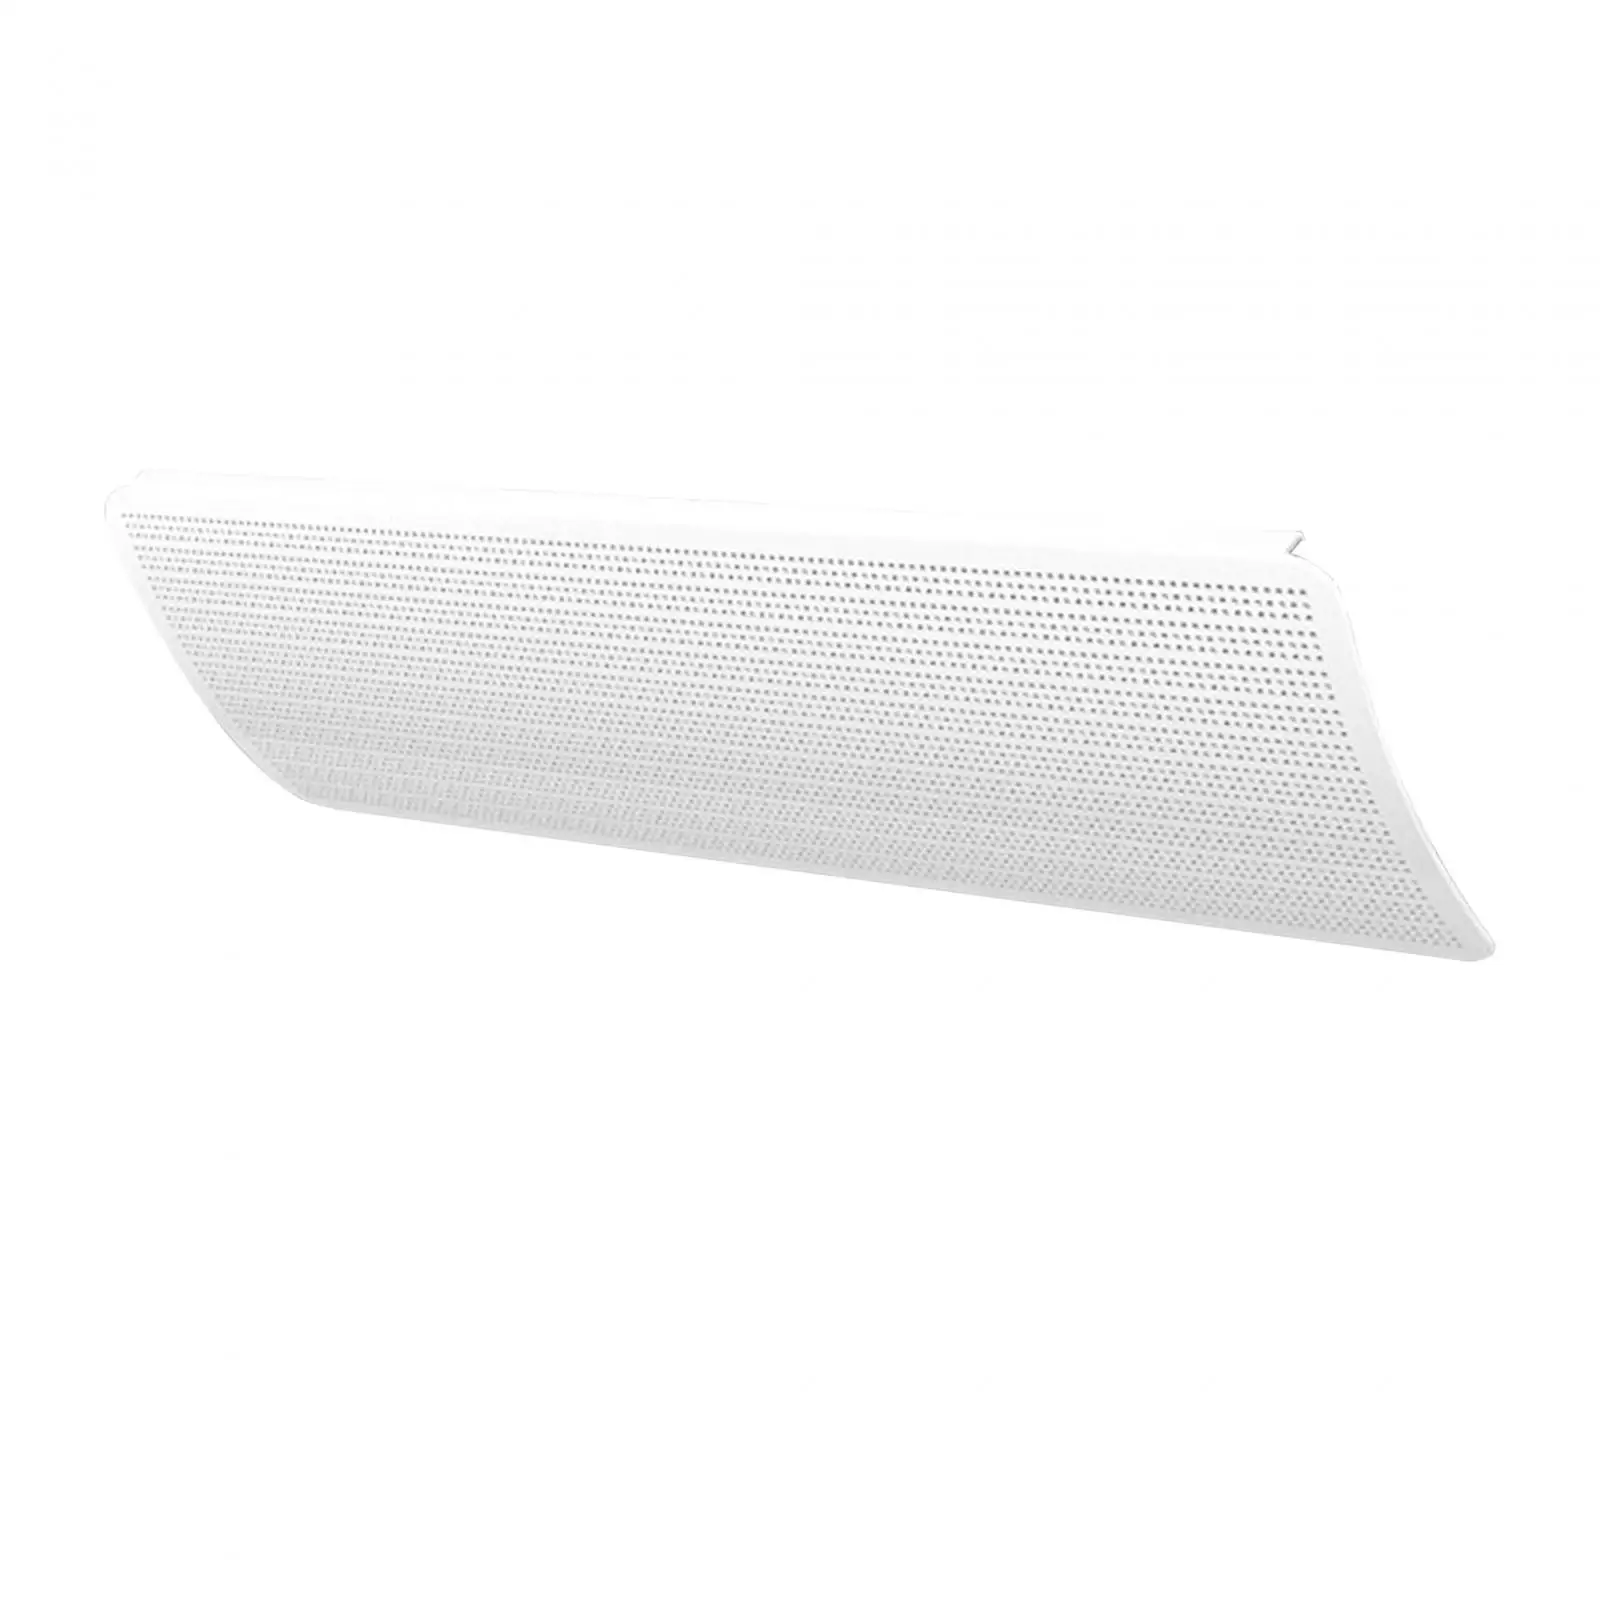 Central air conditioning, air deflector, vent deflector, wind guide cover,